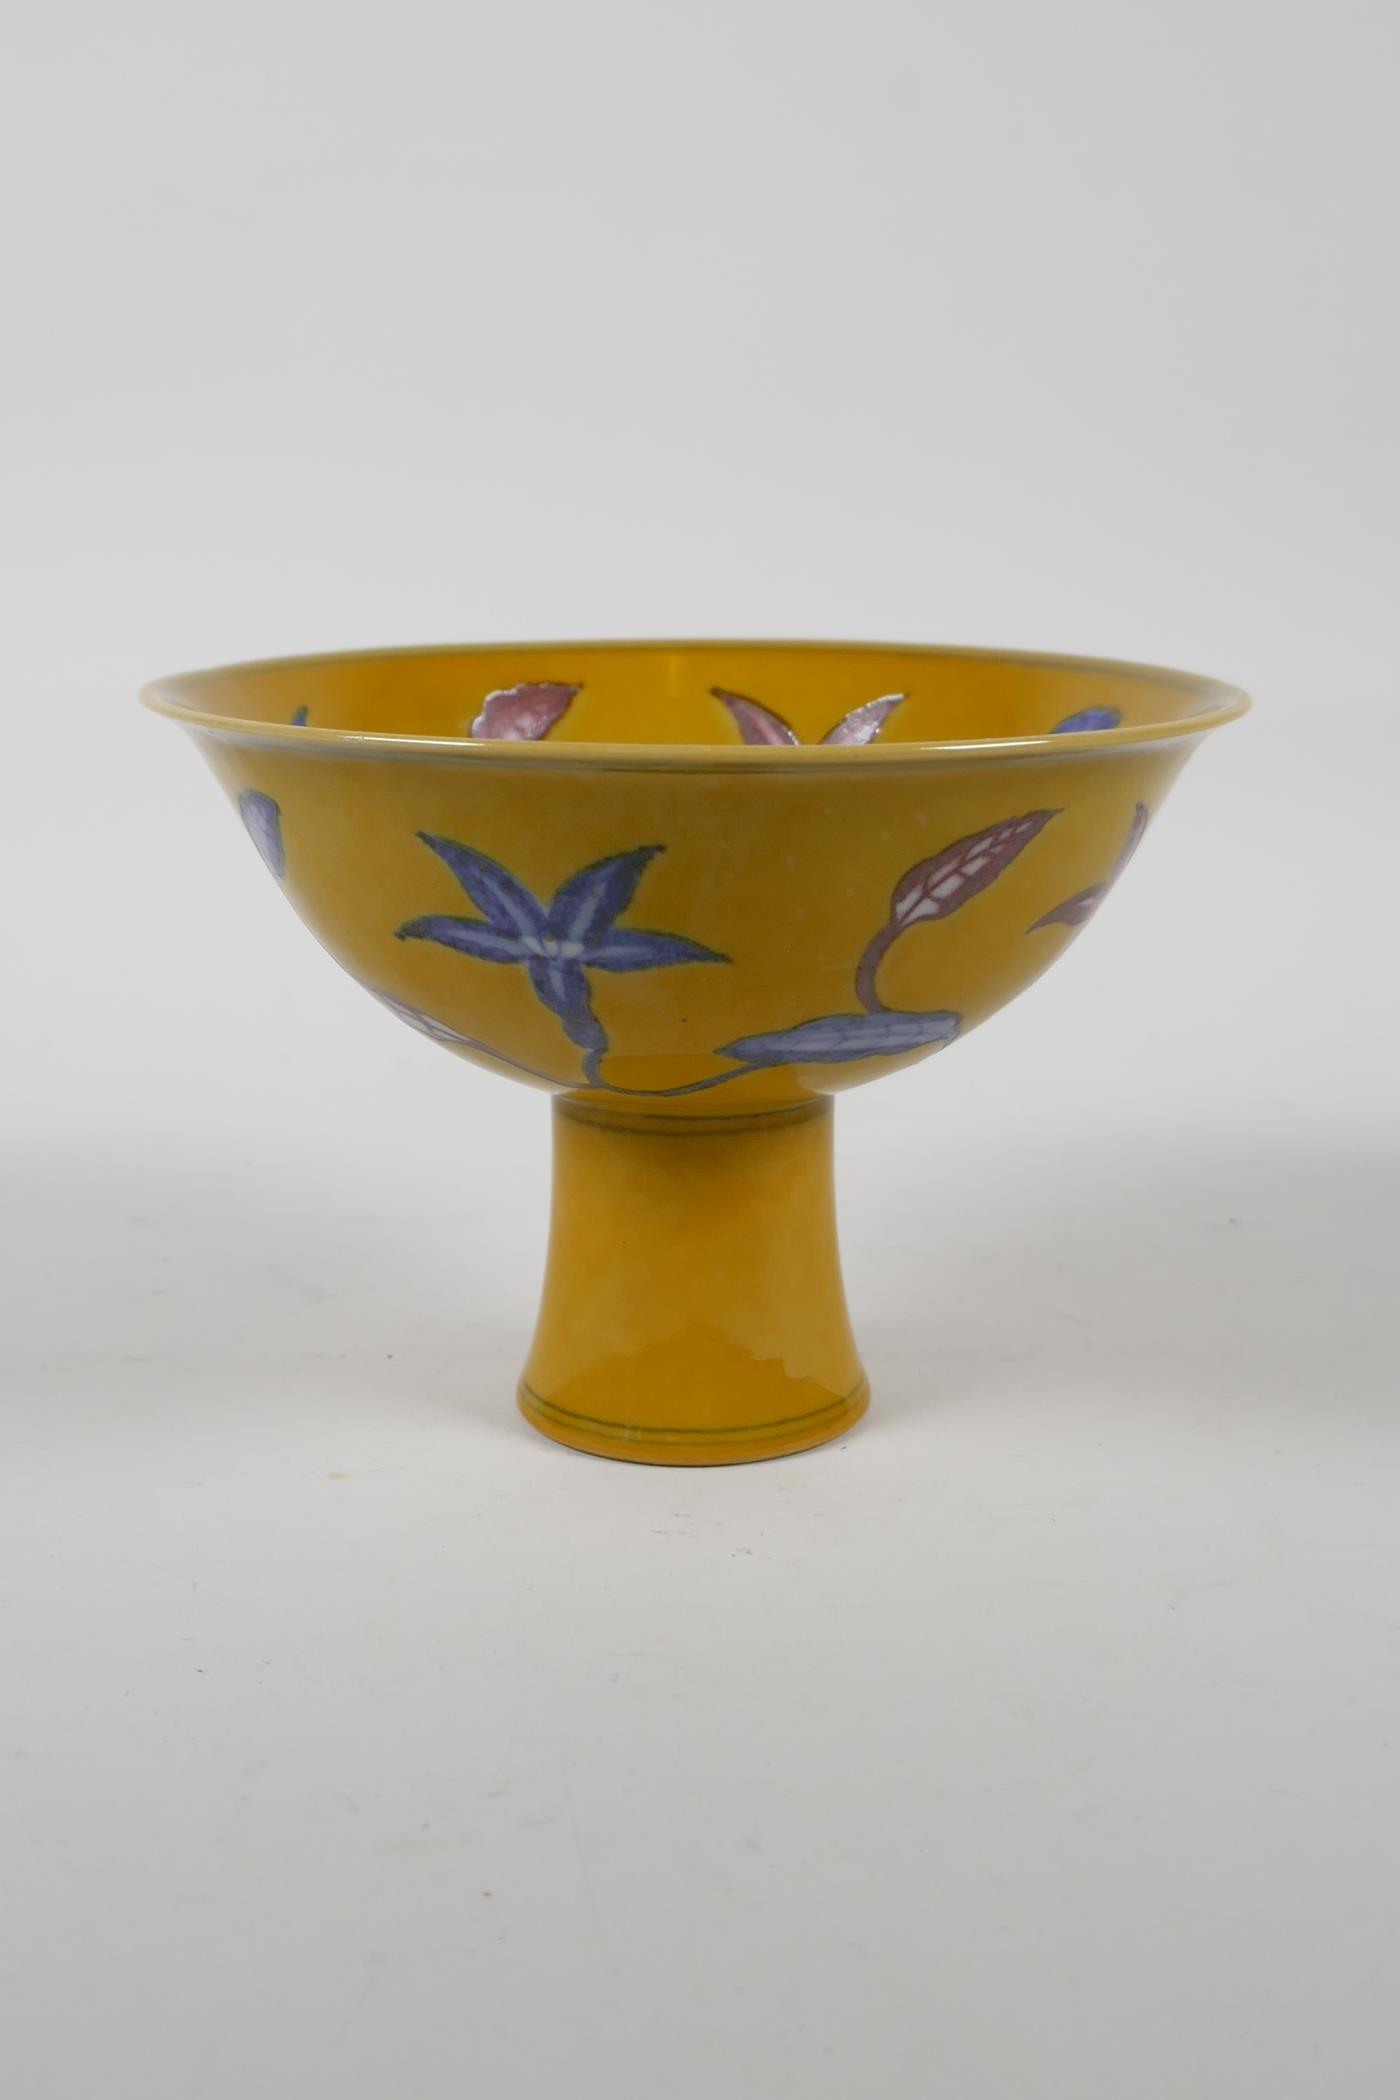 A Chinese yellow ground porcelain stem bowl with red and blue floral decoration, 6 character mark to